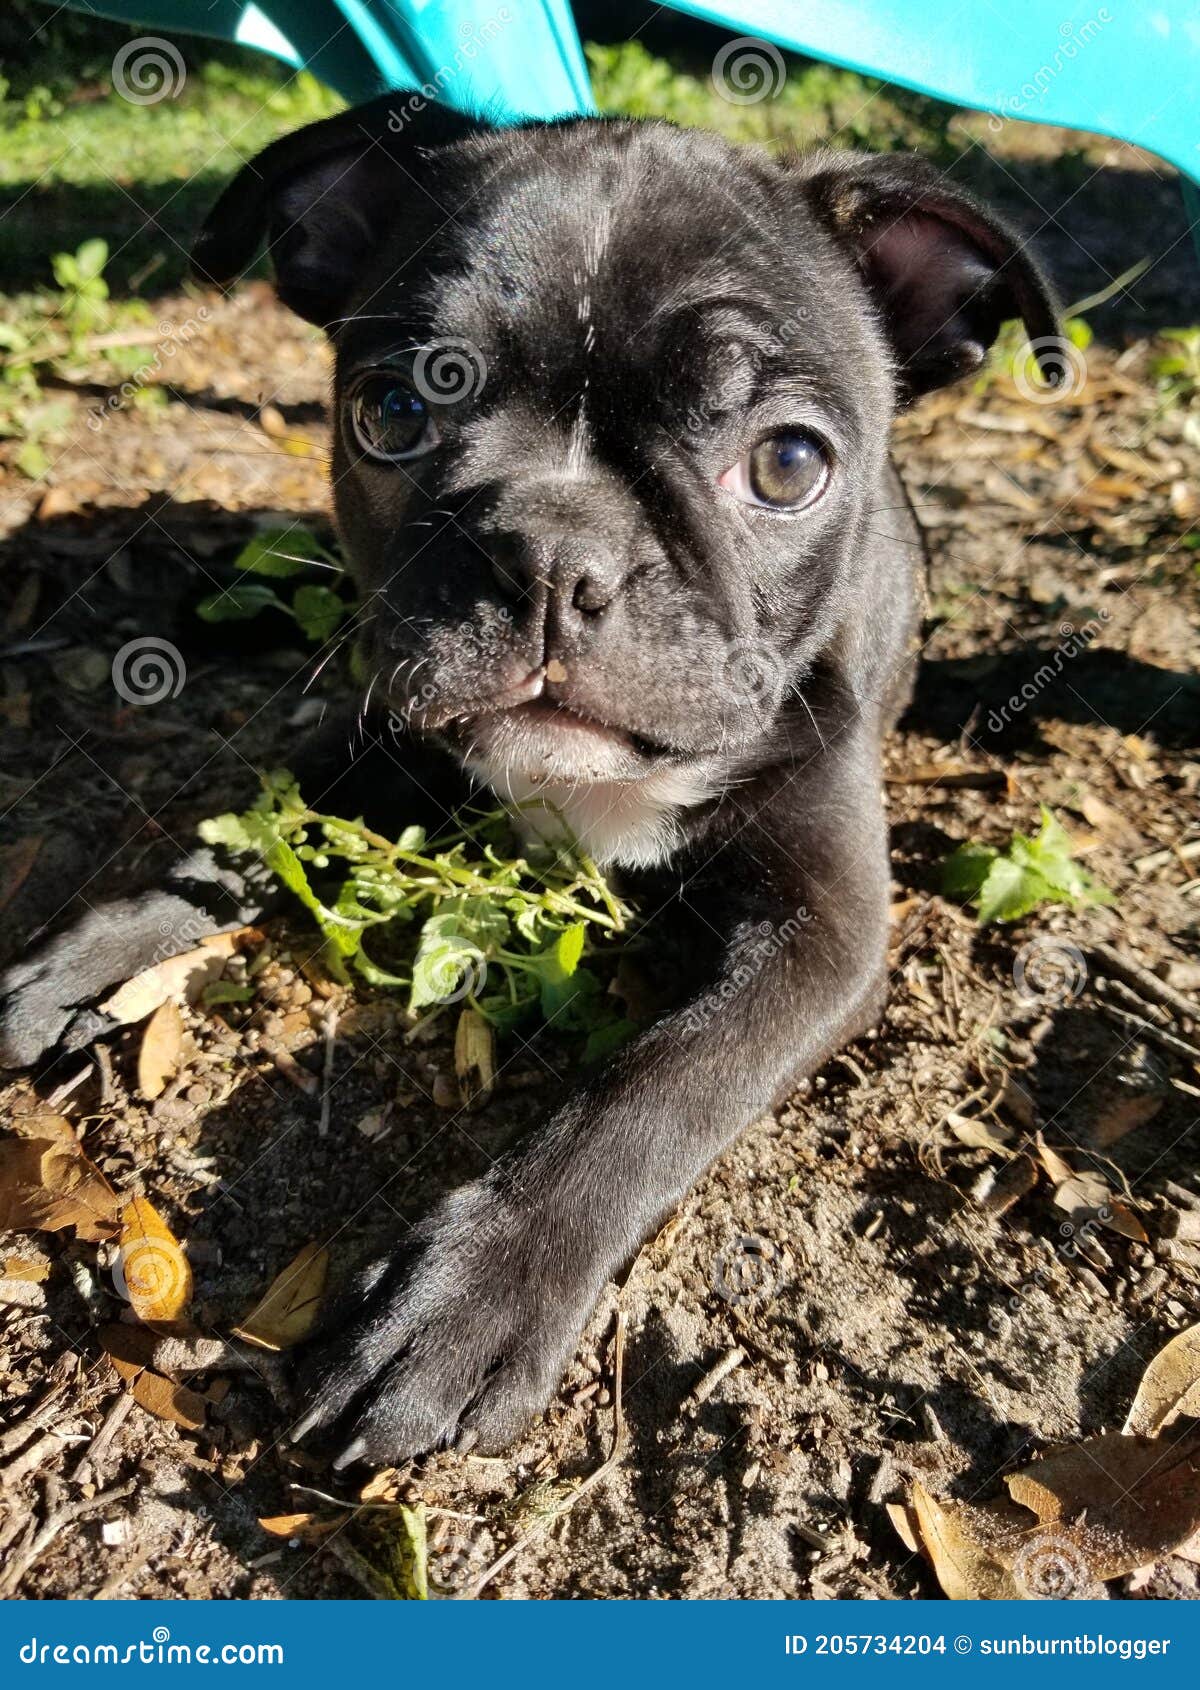 Boston Terrier Pug Mix Puppy Stock Photo - Image of plant: 205734204